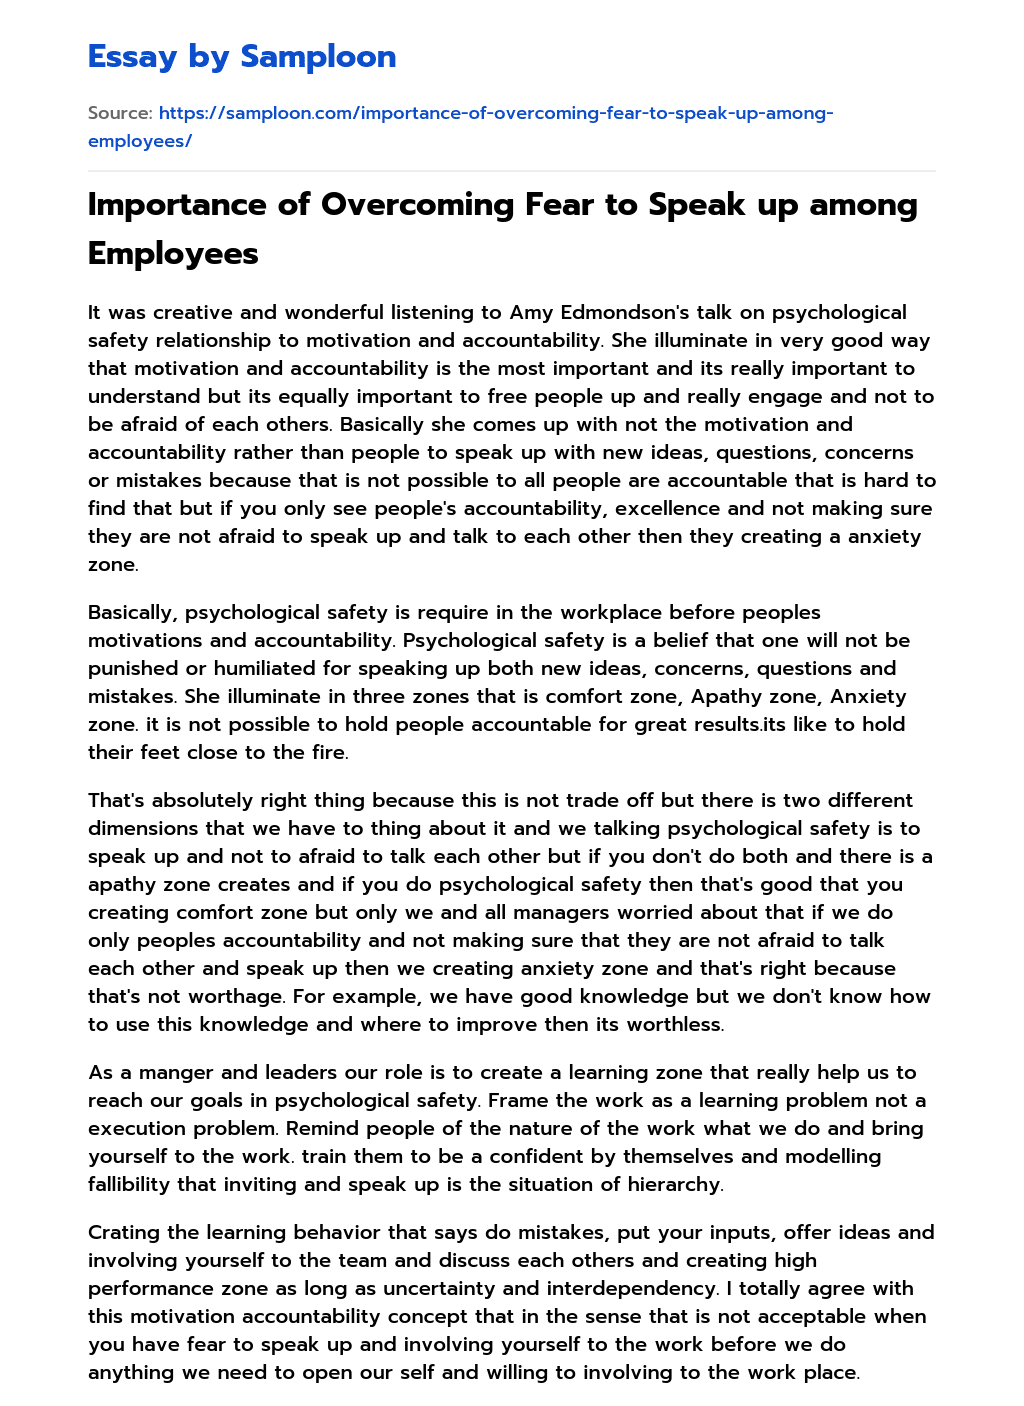 Importance of Overcoming Fear to Speak up among Employees essay